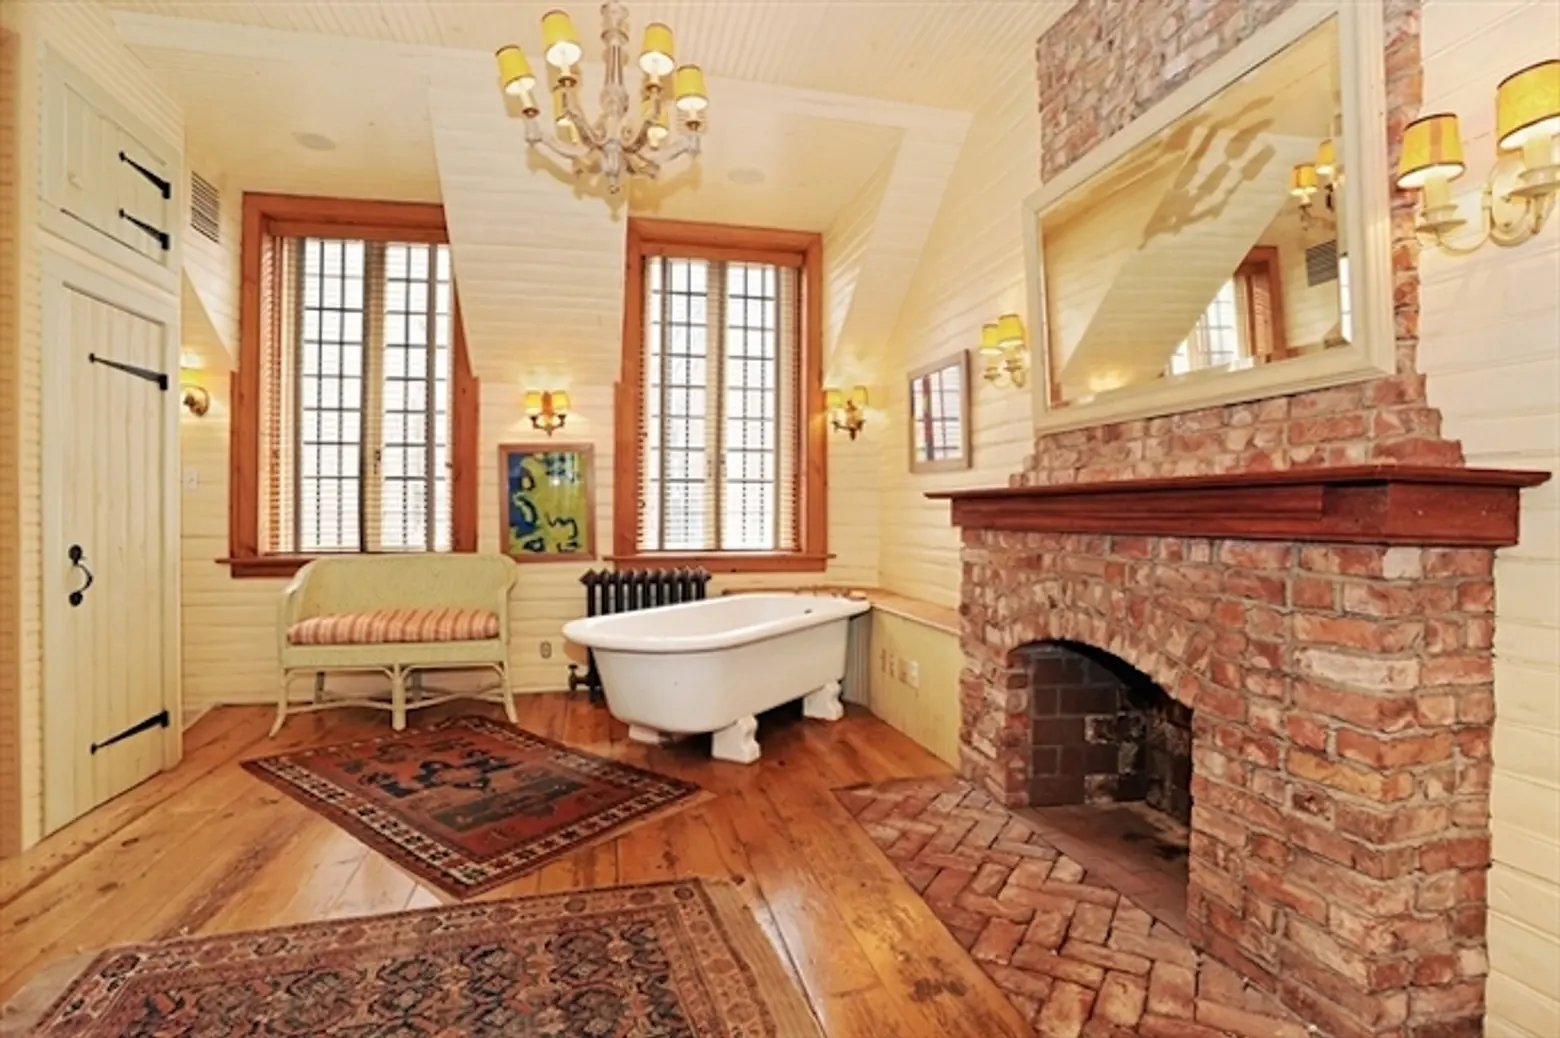 105 West 11th Street, Keith McNally restaurateur, French country-style kitchen